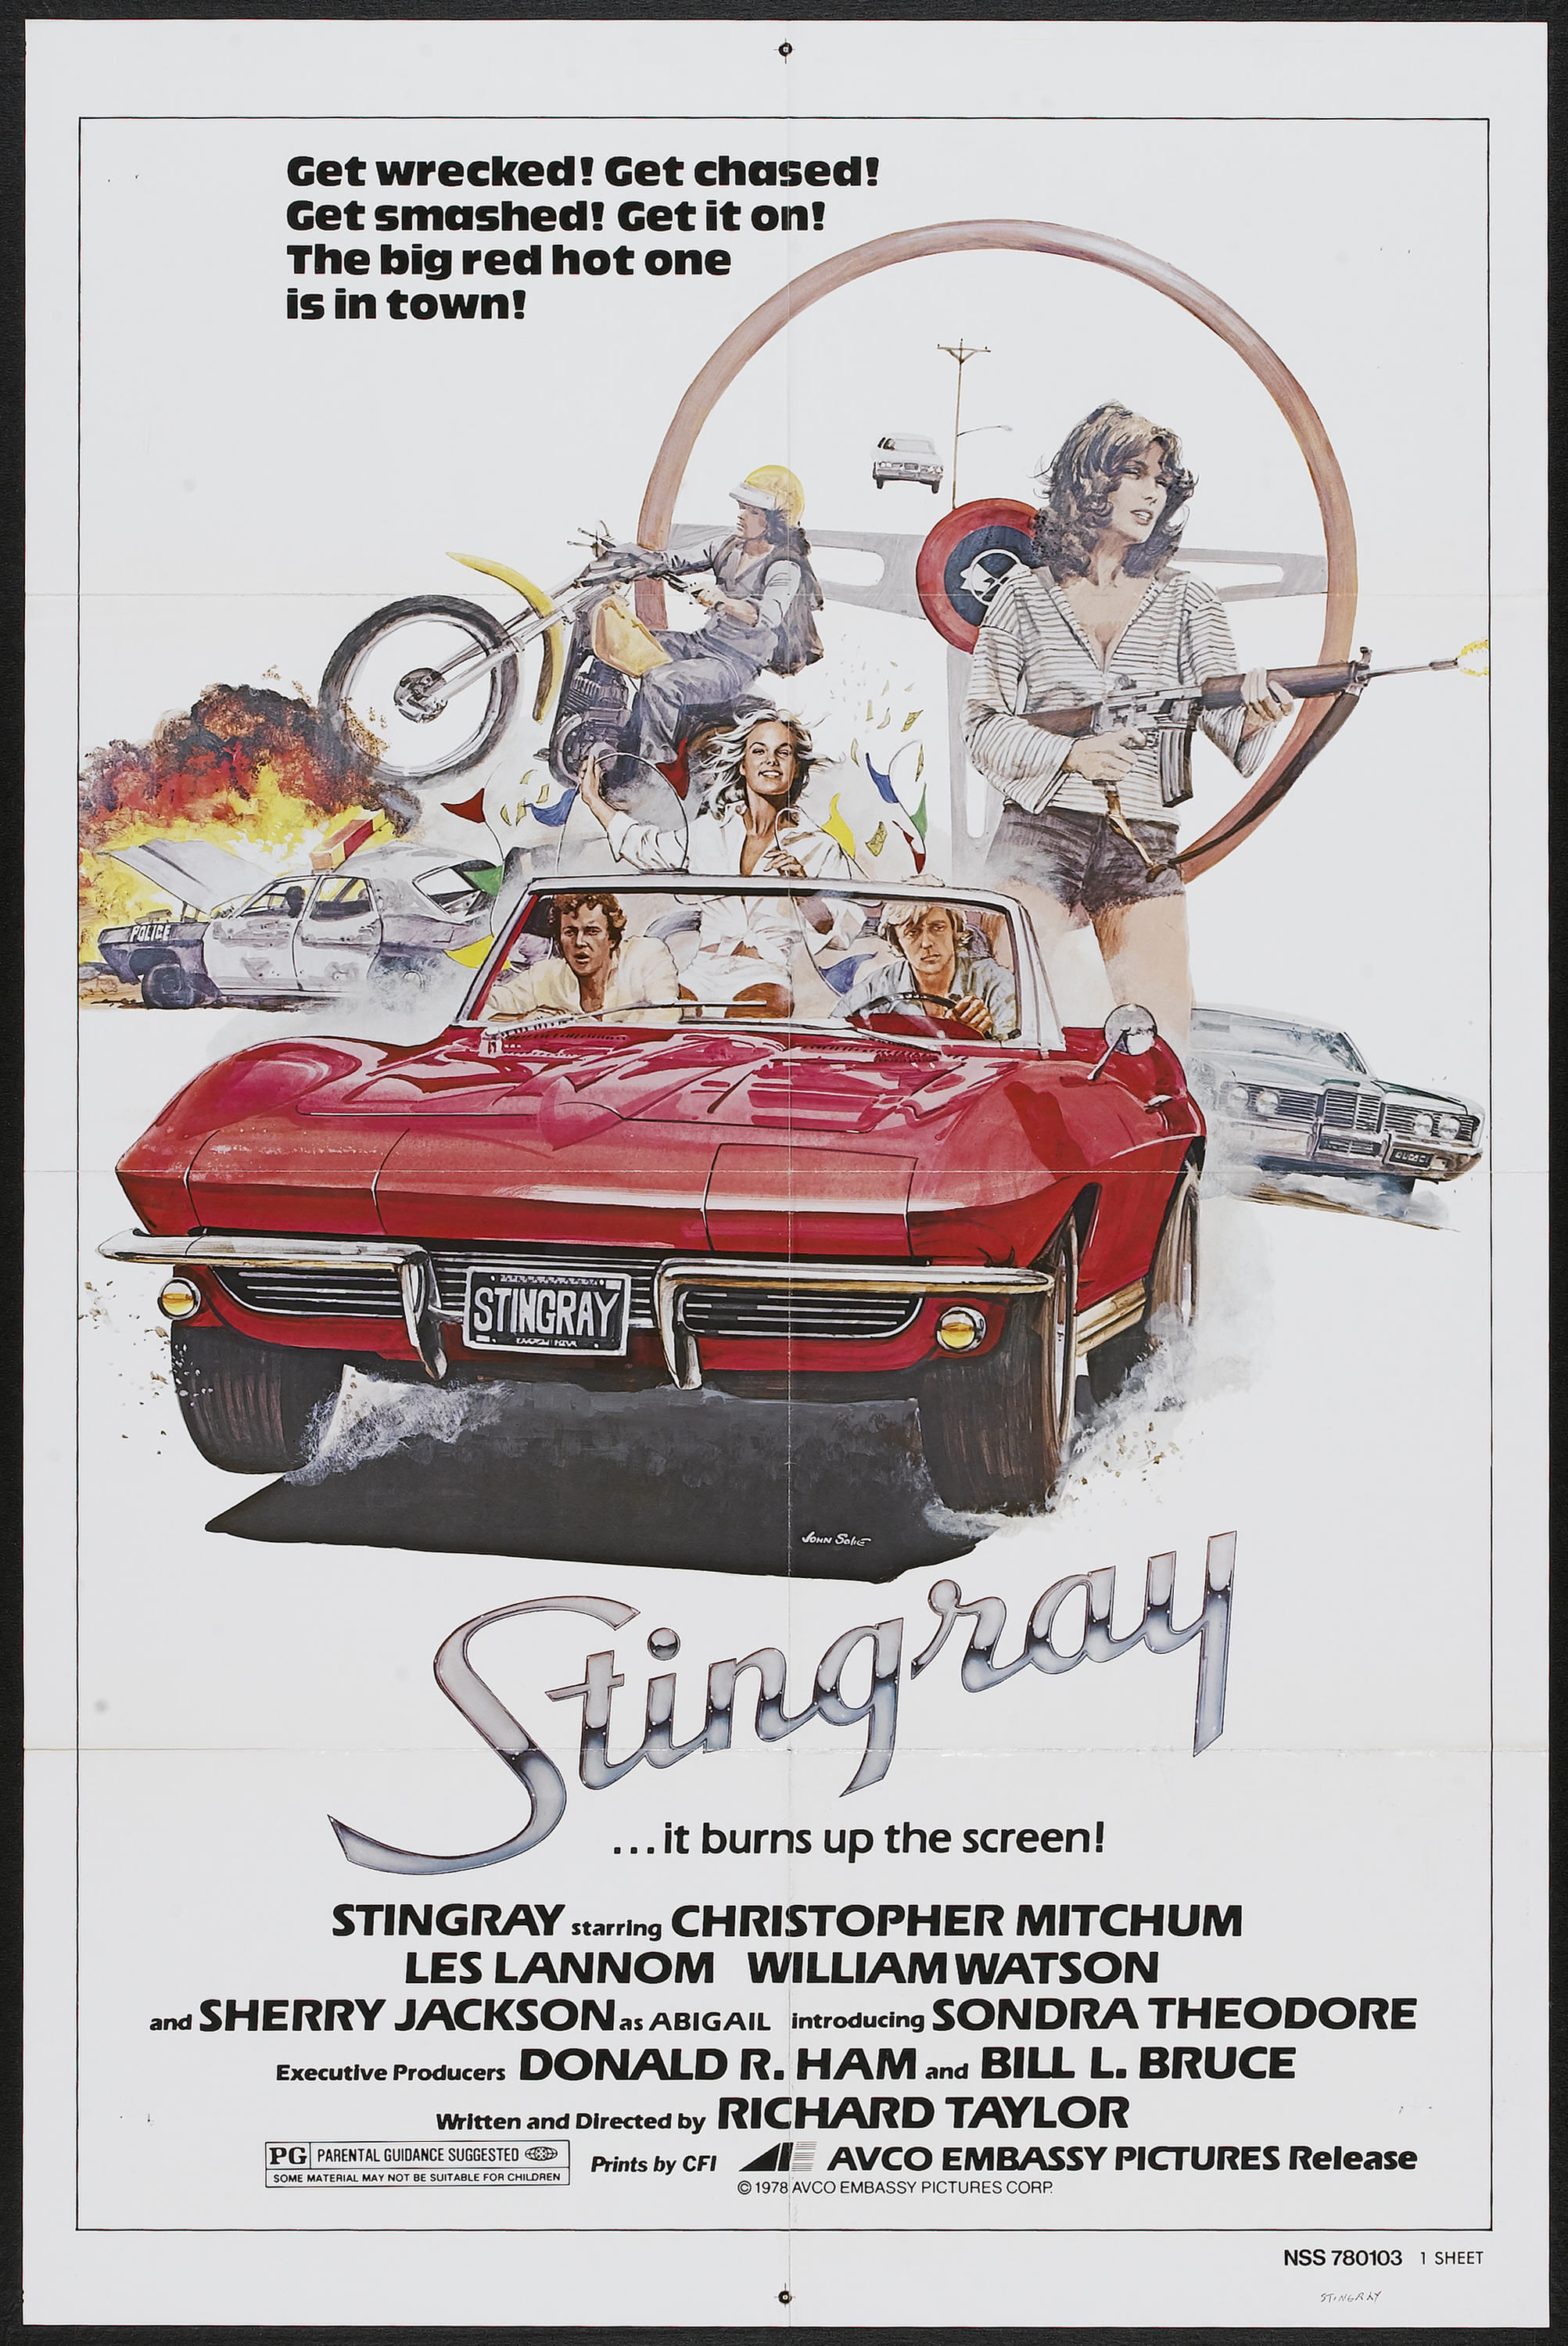 Stingray - Get wrecked! Get chased! Get smashed! Get it on! The big red hot one is in town! Story ... it burns up the screen! Stingray Christopher Mitchum Les Lannom William Watson Sherry Jackson..Angal Y Sondra Theodore E P Donald R. Ham. Bill L. Bruce w